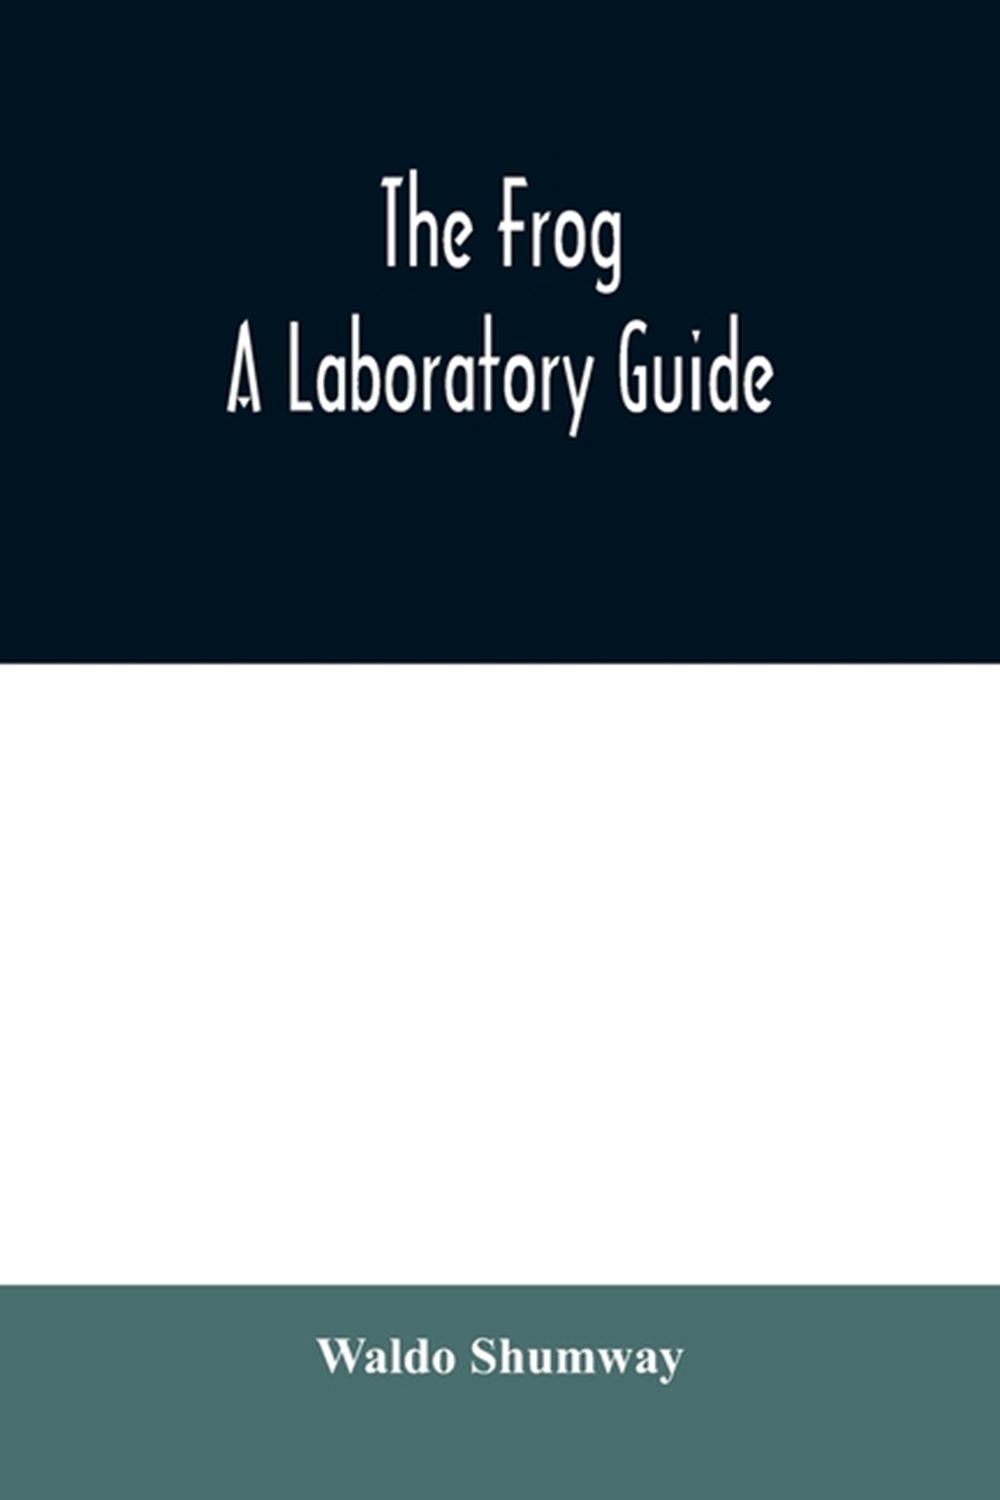 frog a laboratory guide